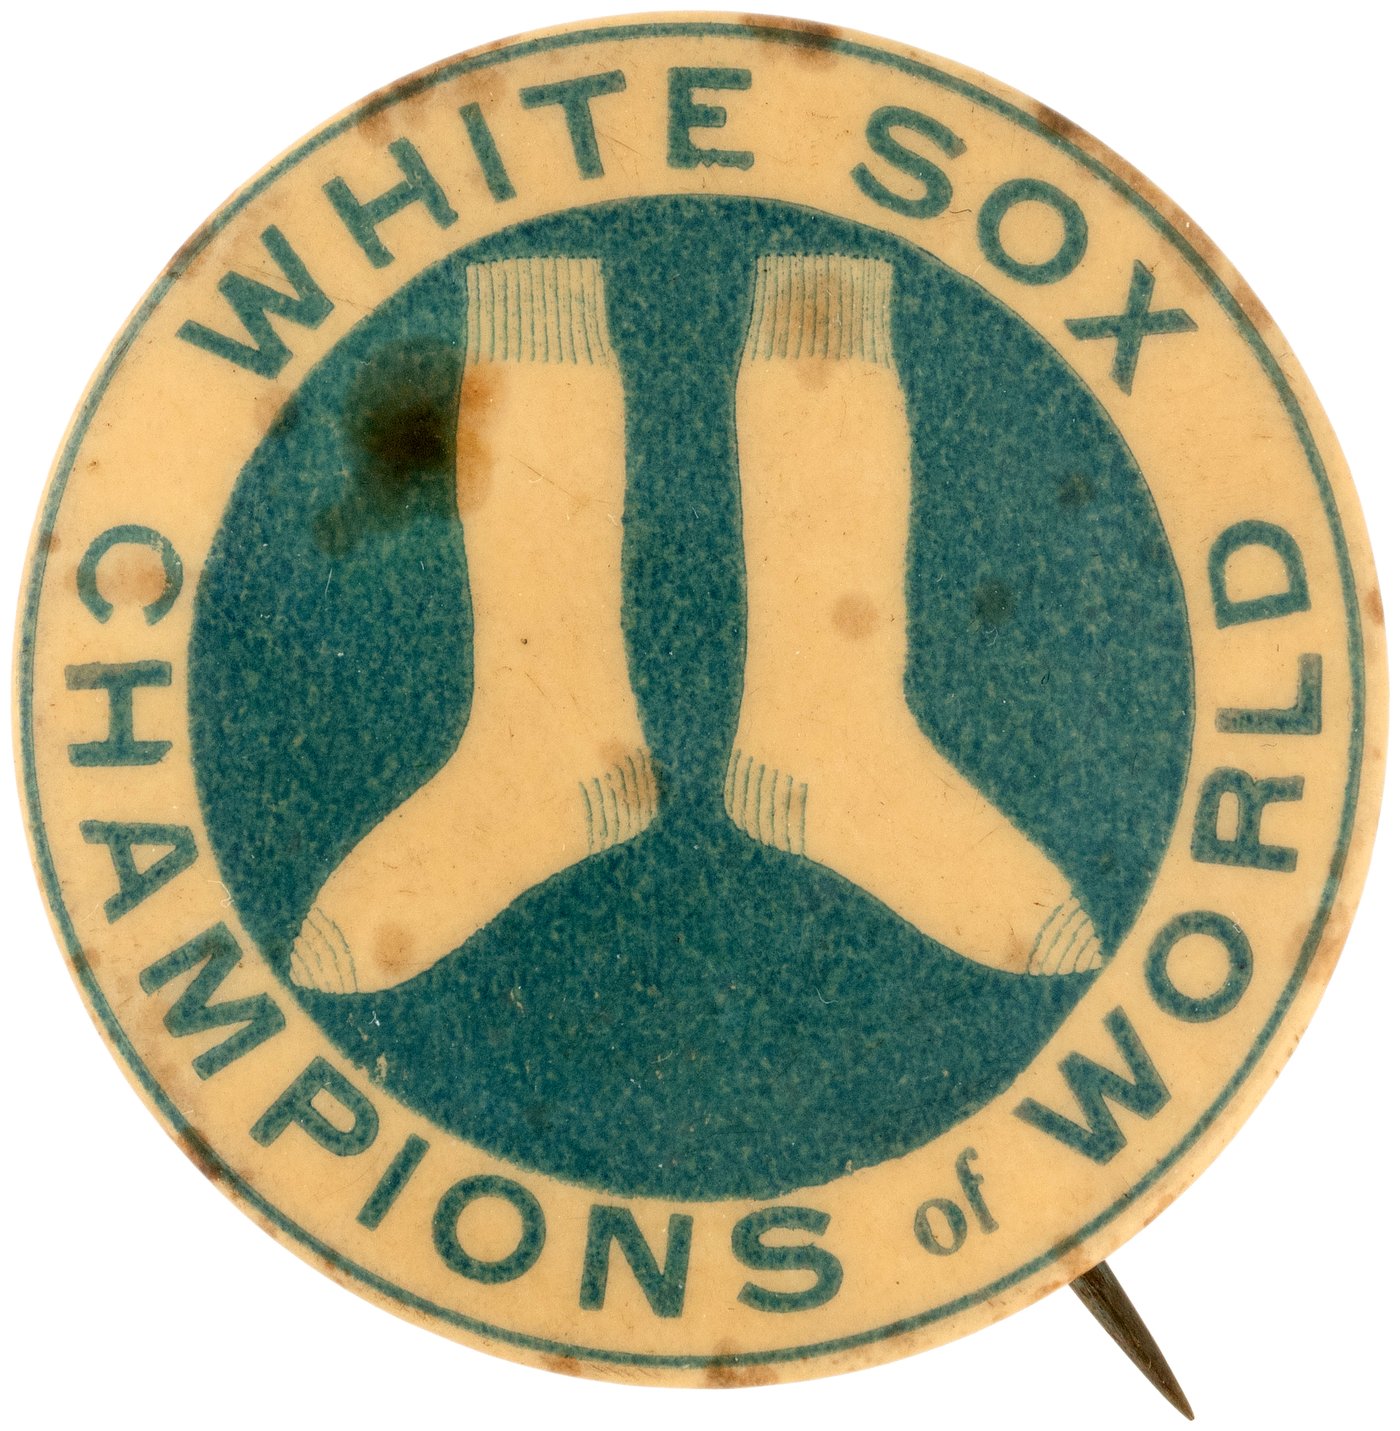 Hake's - 1906 CHICAGO WHITE SOX CHAMPIONS OF THE WORLD BUTTON.